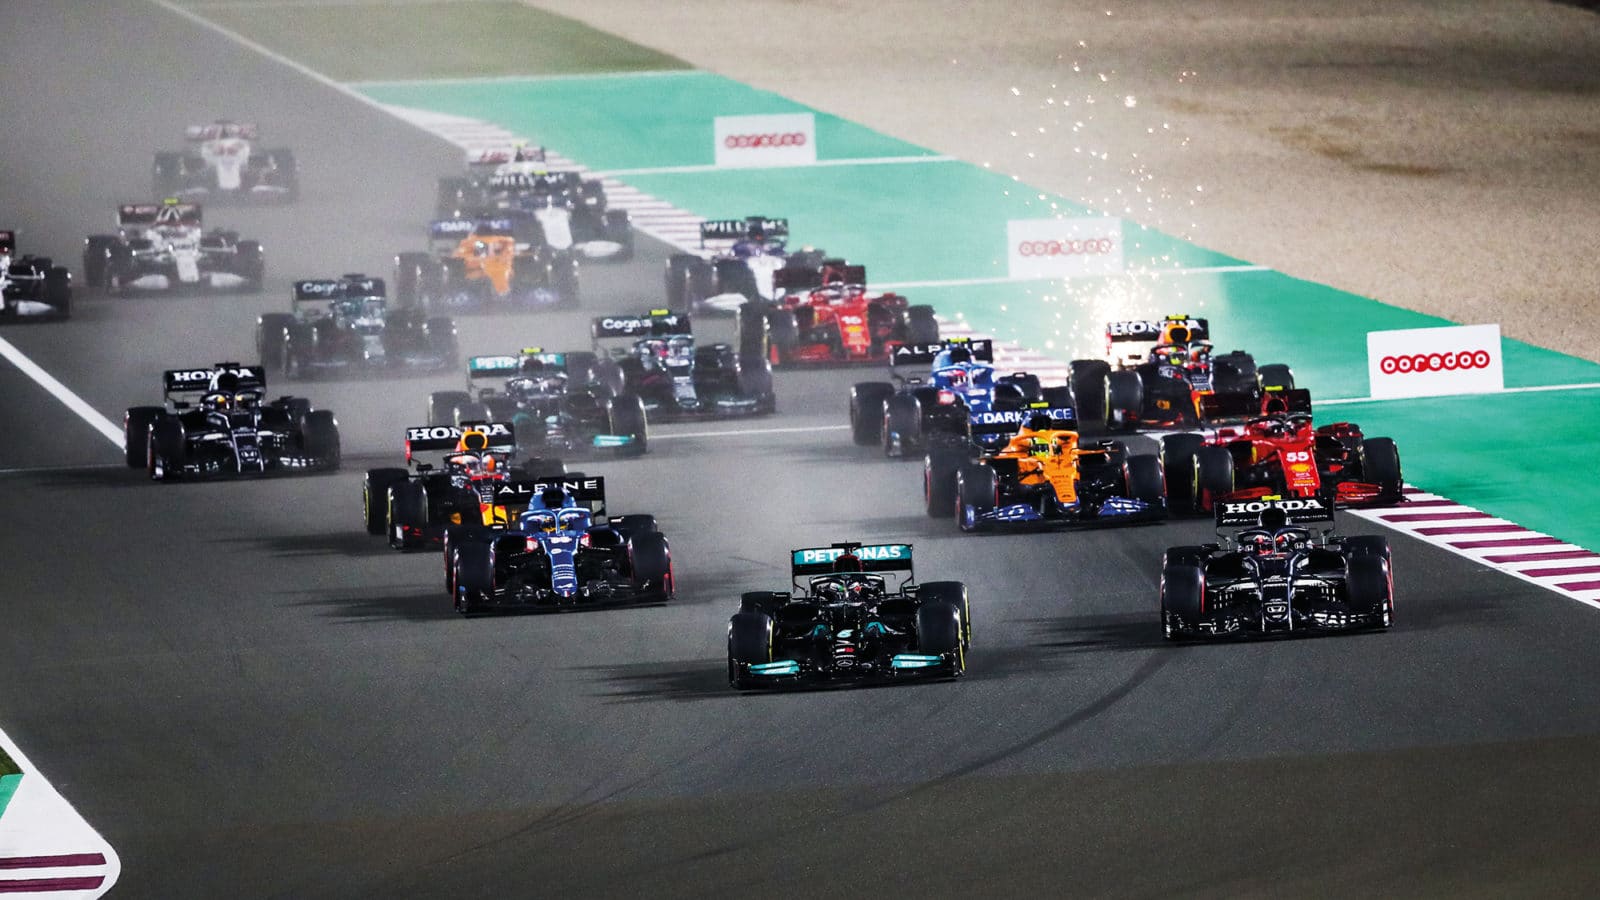 Lewis Hamilton leads at the start of the 2021 Qatar Grand Prix